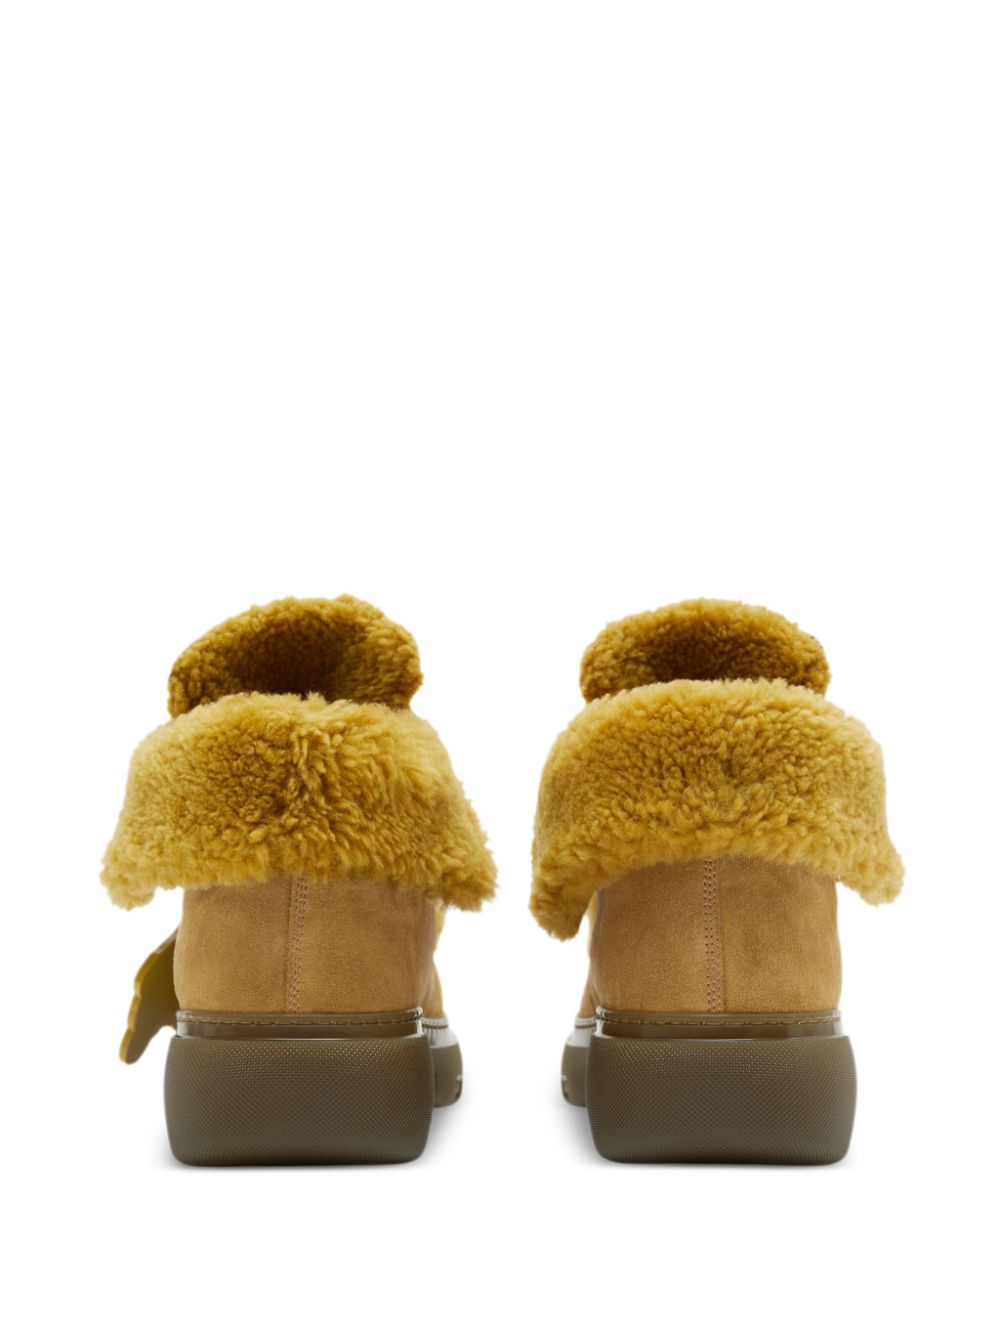 CREEPER SHEARLING-TRIM SUEDE BOOTS